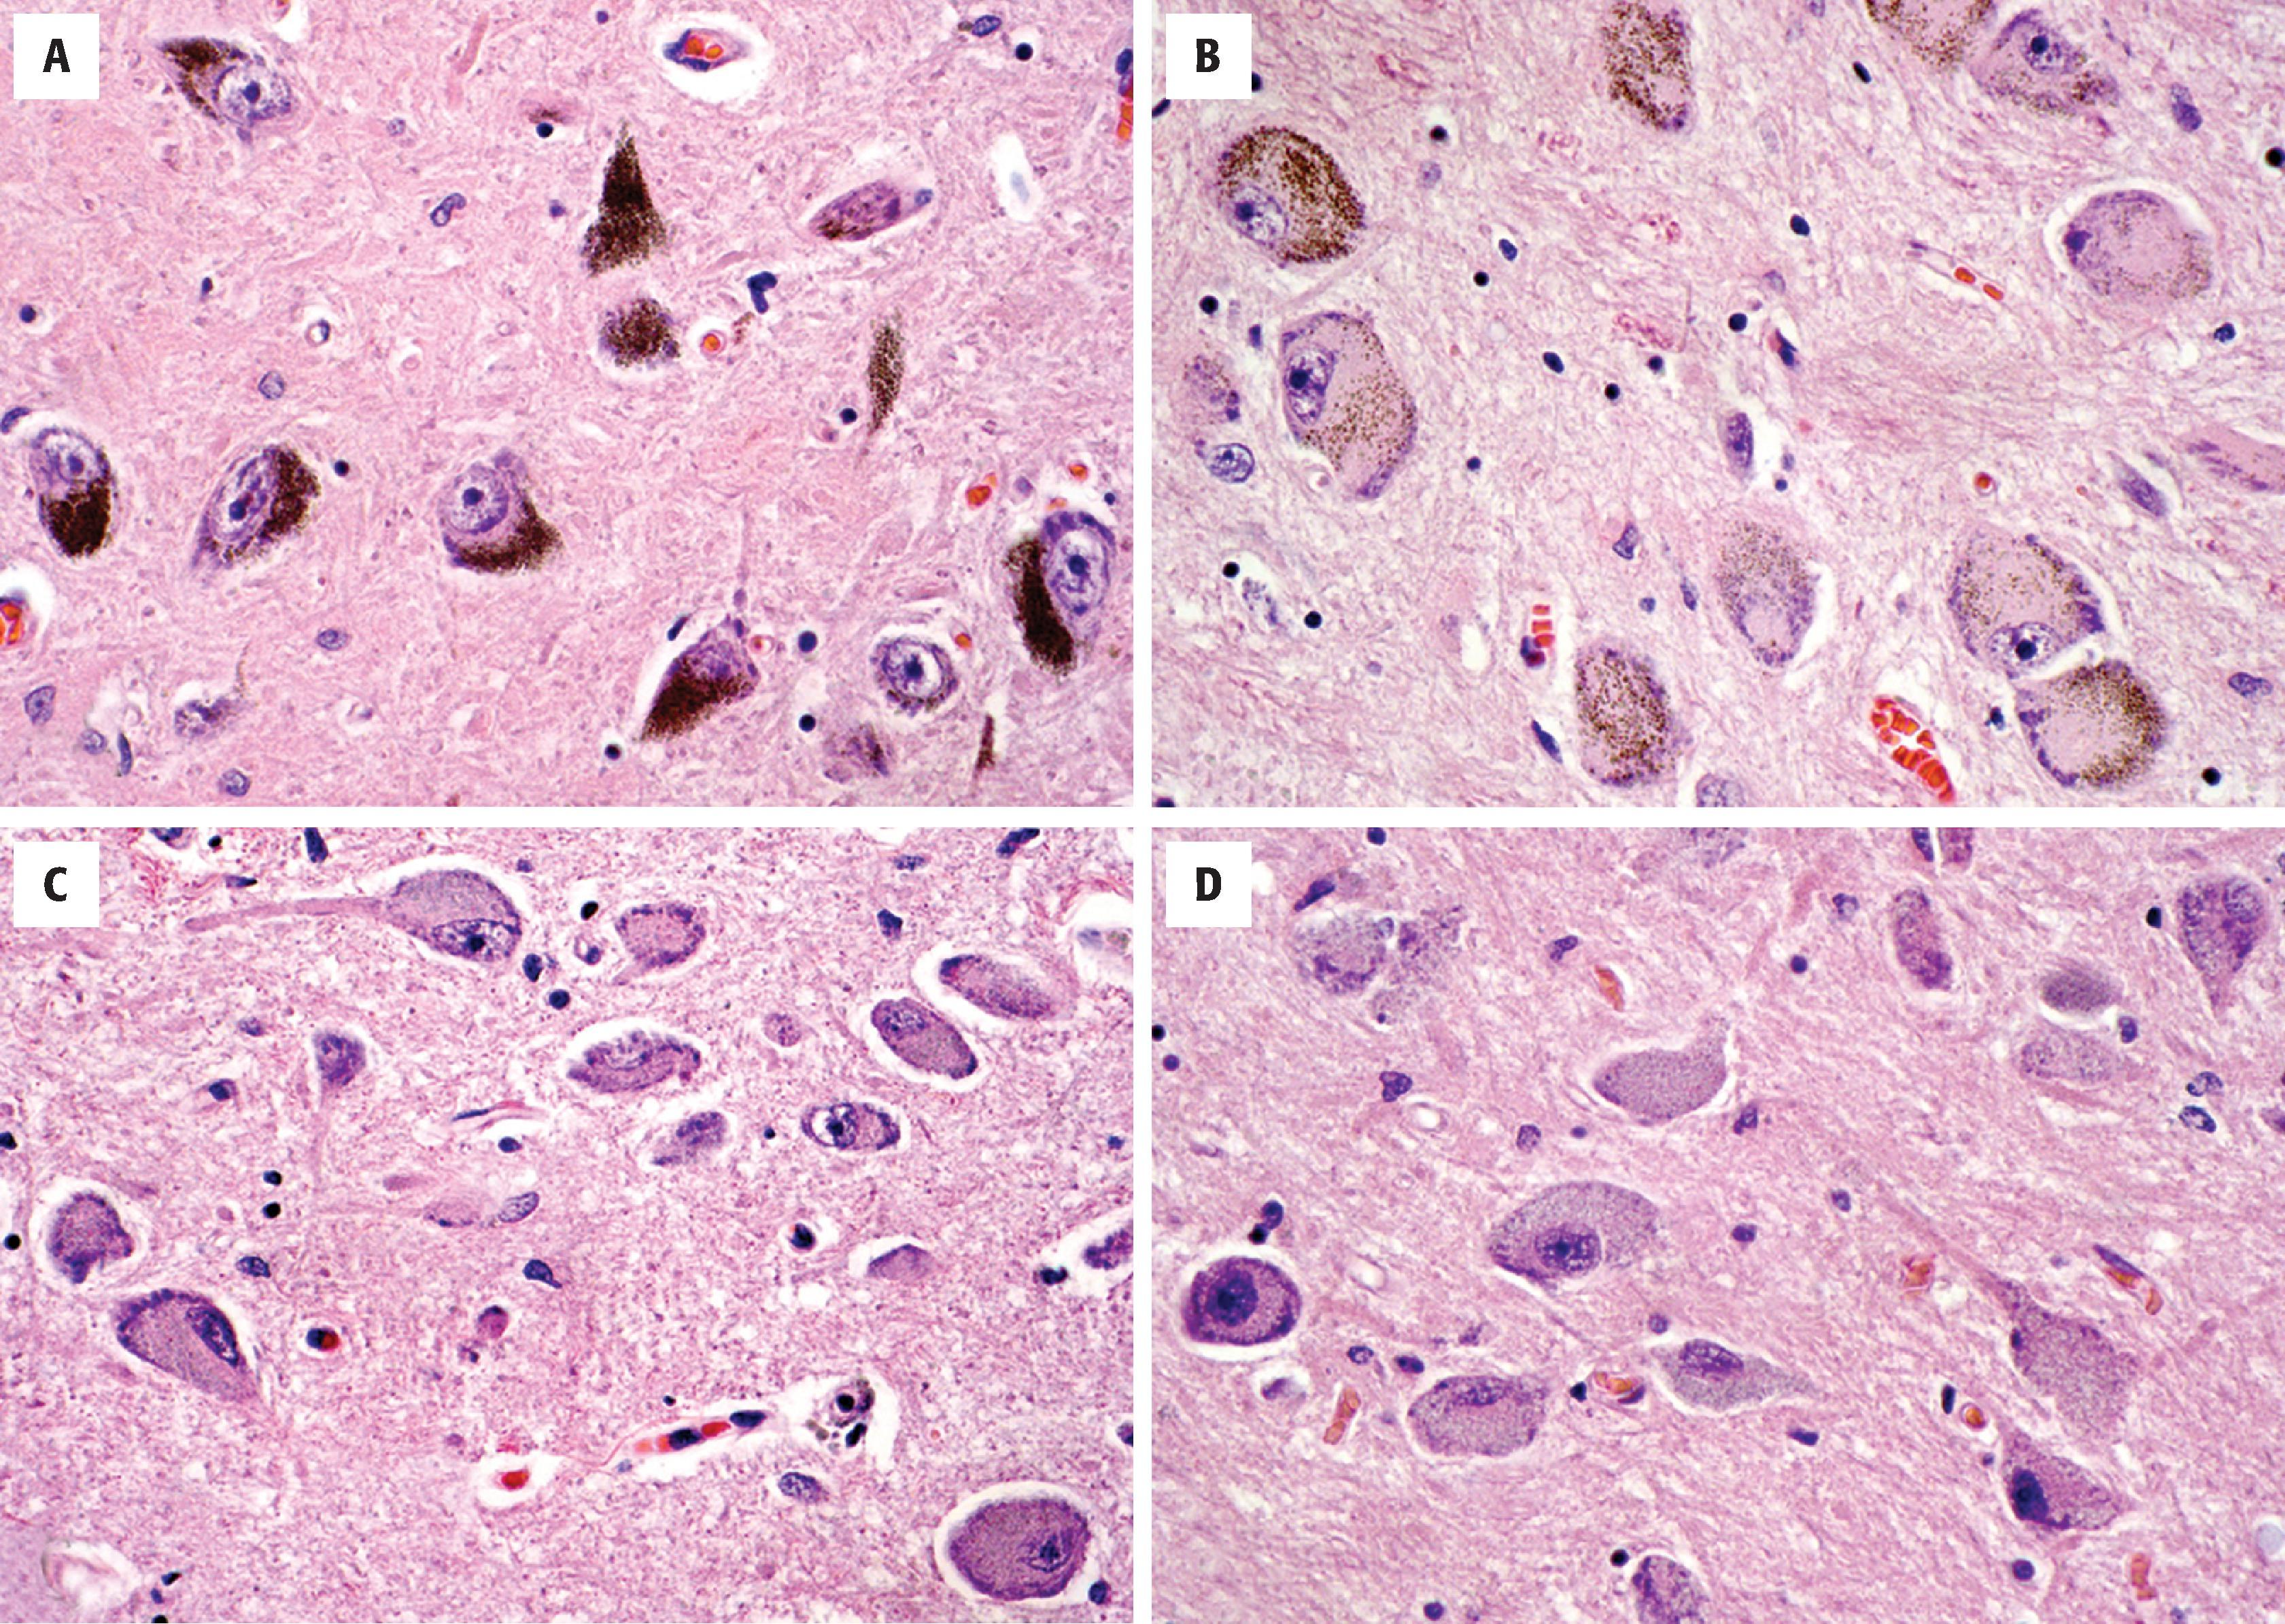 FIGure 1.9, Diffusely projecting neurons producing specific bioaminergic neurotransmitters. A , Dopaminergic neurons of the substantia nigra are deeply pigmented due to accumulation of neuromelanin. B , Neurons of the locus coeruleus are also pigmented and produce norepinephrine. C , Near the midline in the brain stem are serotonergic neurons of the raphe nuclei. D , Neurons of the nucleus basalis of Meynert produce acetylcholine.